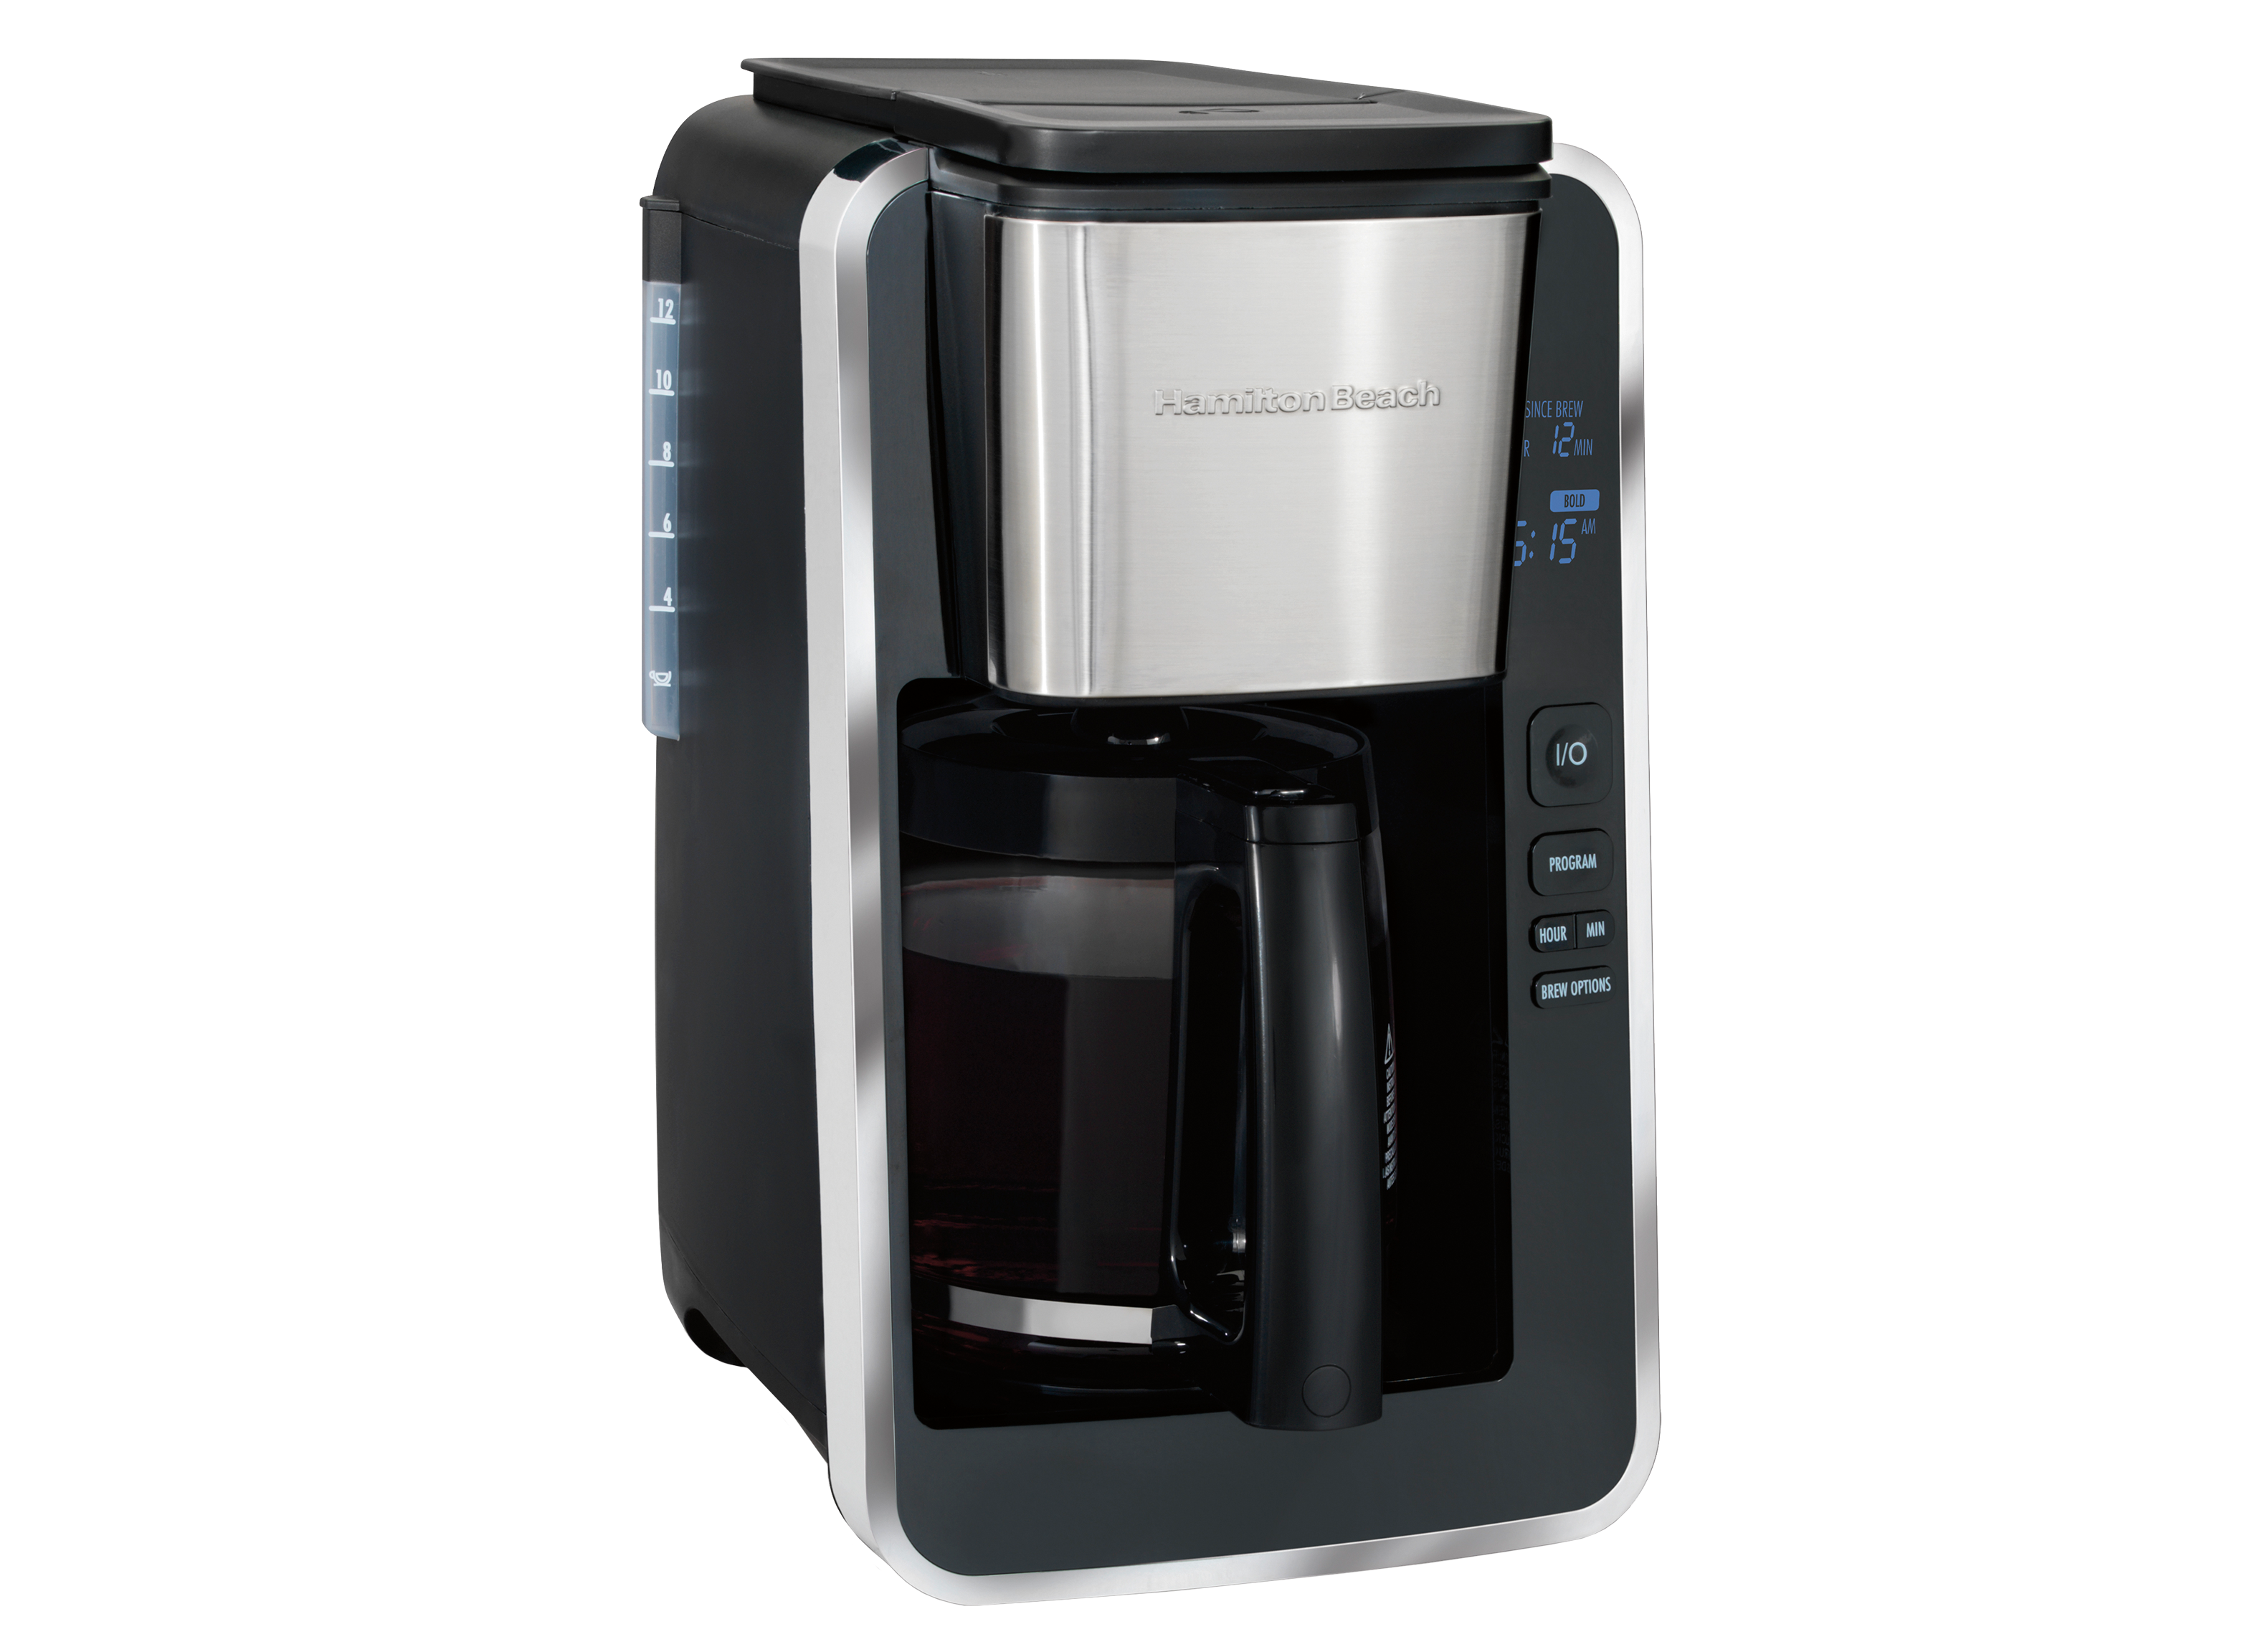 https://crdms.images.consumerreports.org/prod/products/cr/models/396977-drip-coffee-makers-hamilton-beach-easy-access-deluxe-12-cup-46320-10000915.png